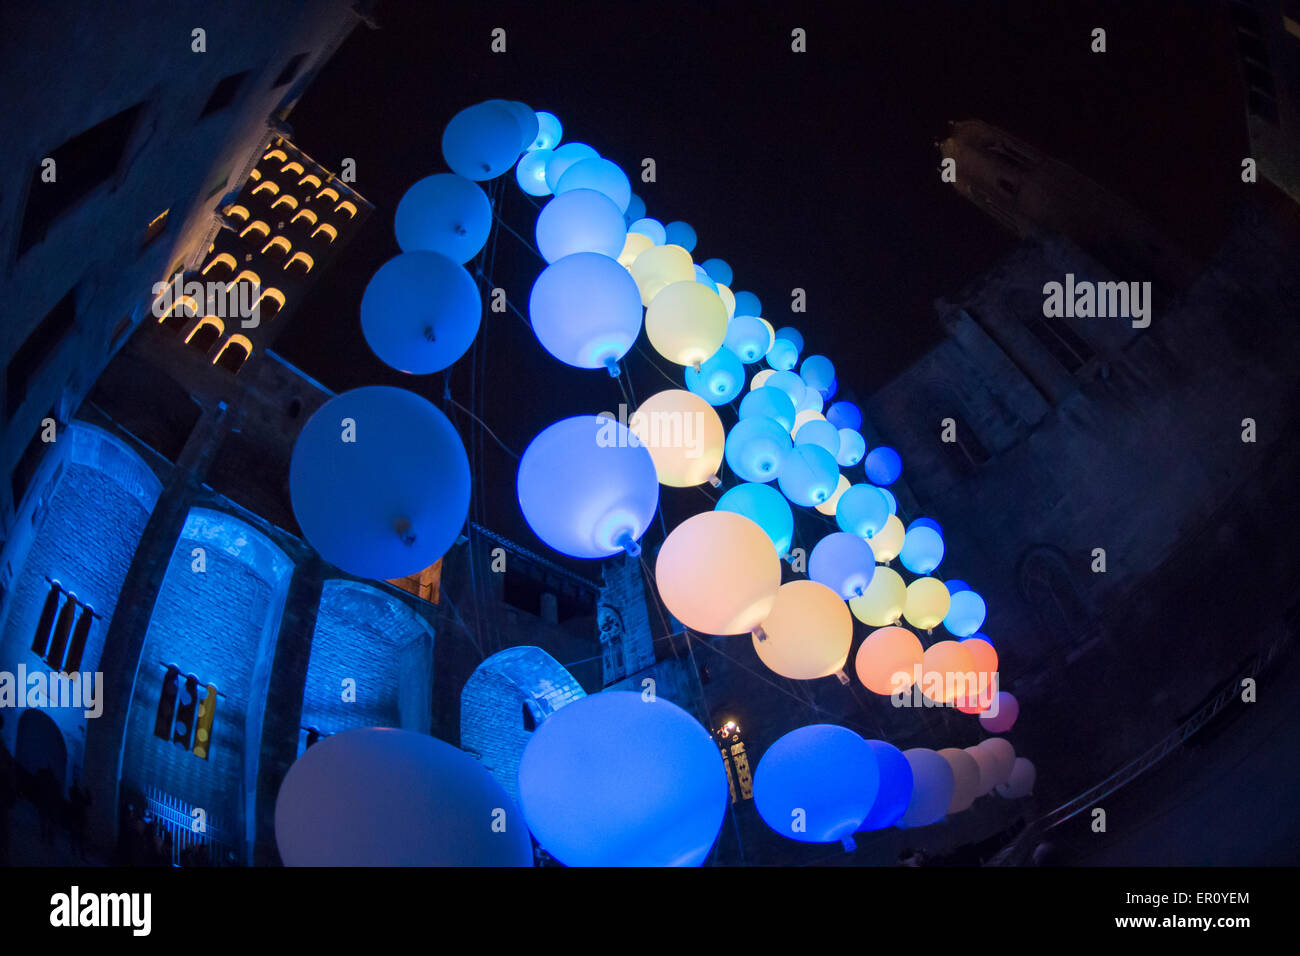 The Plaça del Rei and Saló del Tinell hosting an artist's multimedia exhibit of variably-colored balloons, February 2015 Stock Photo